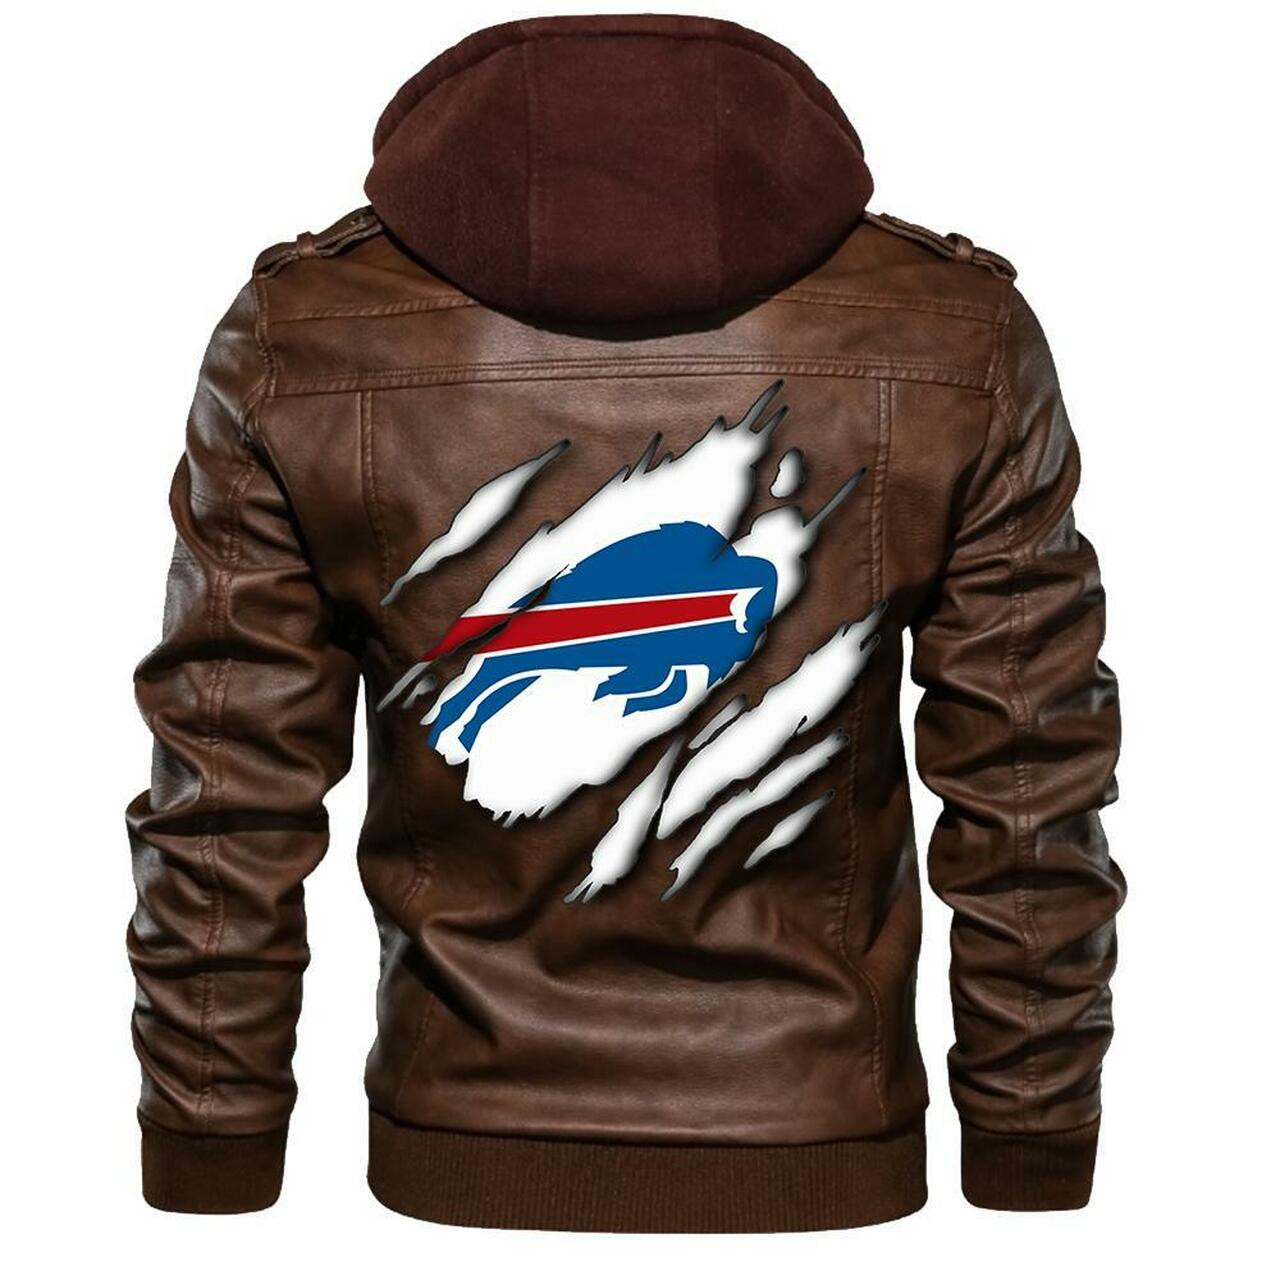 You can find Leather Jacket online at a great price 73